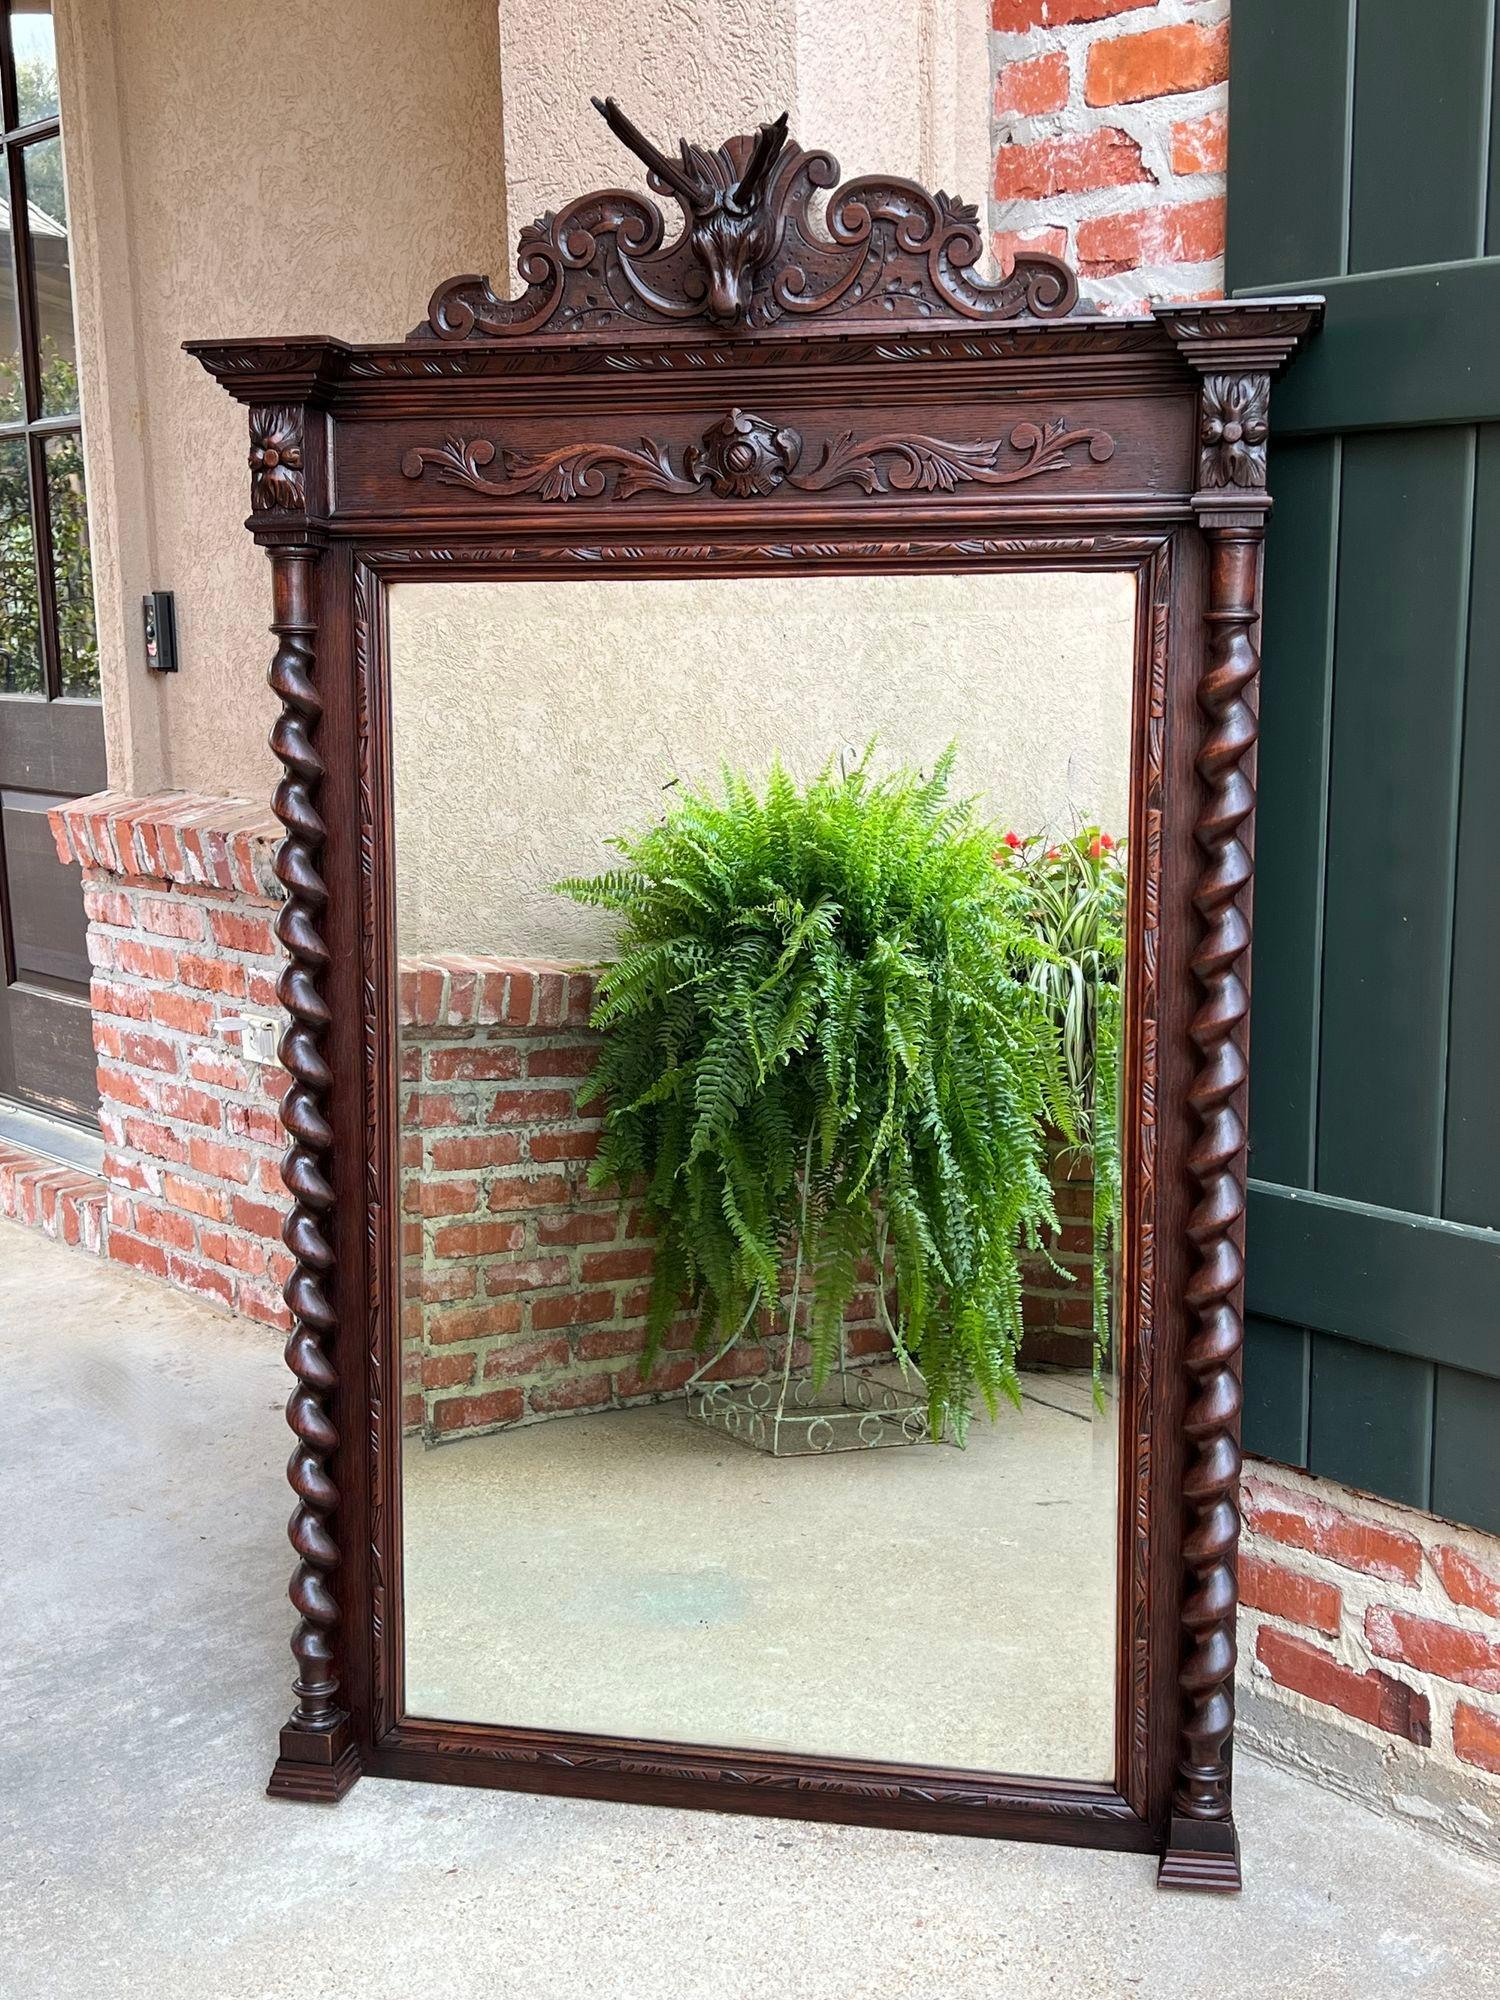 Antique French Pier mantel wall mirror black forest barley twist carved oak stag.

Direct from France, a gorgeous hand carved 19th century French pier/mantel mirror, over 6 ft. tall with outstanding detail!! 
The details reveal it was probably